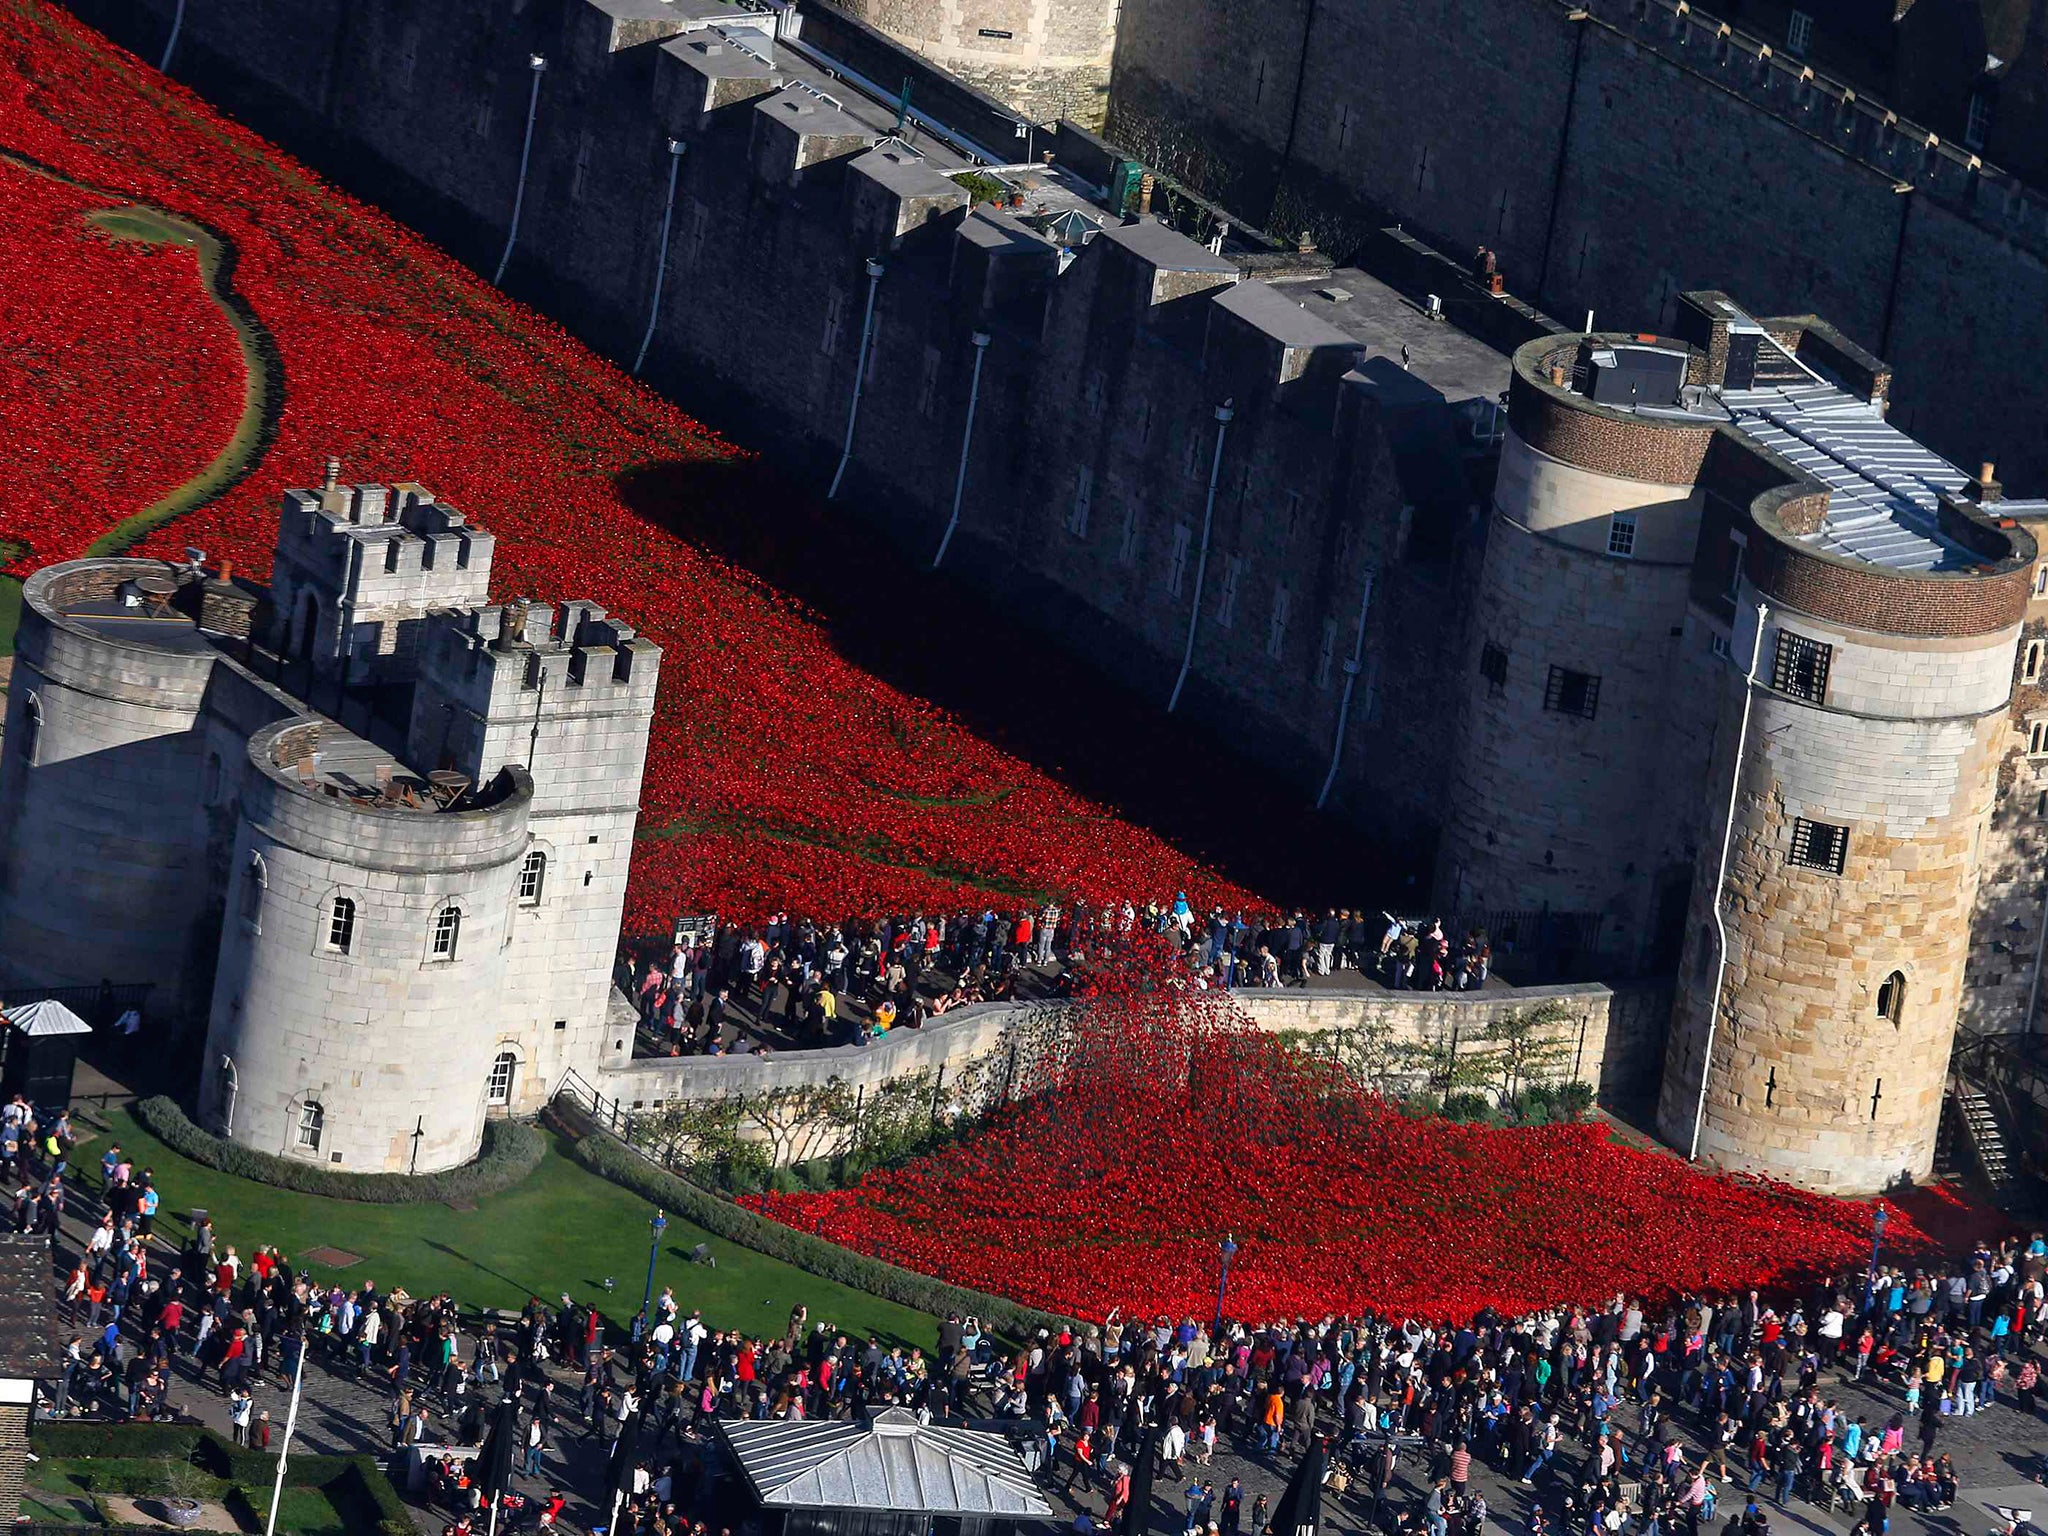 Crowds gather to see the red ceramic poppies that form part of the art installation "Blood Swept Lands and Seas of Red" at the Tower of London in London